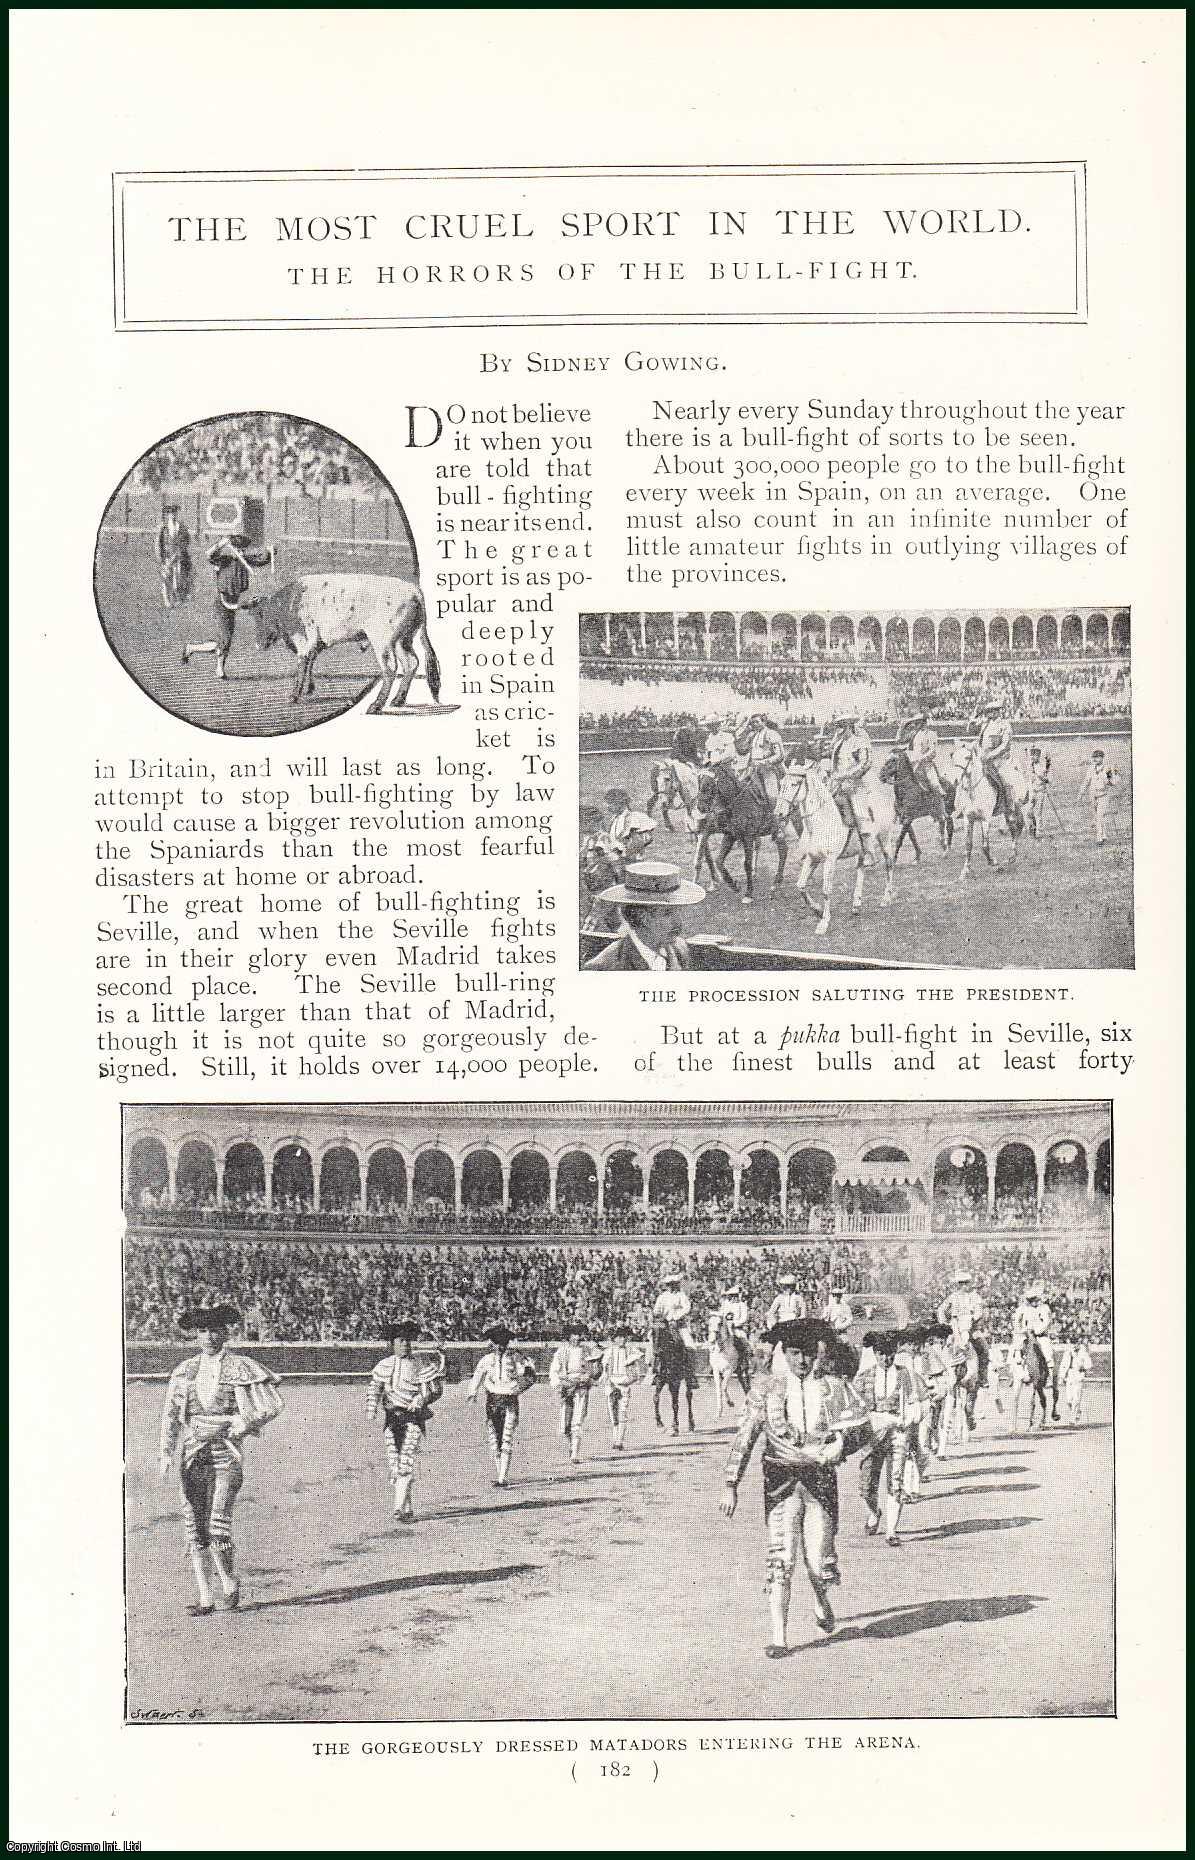 The Horrors Of The Bull-Fight in Spain The Most Cruel Sport In The World. An uncommon original article from the Harmsworth London Magazine, 1898